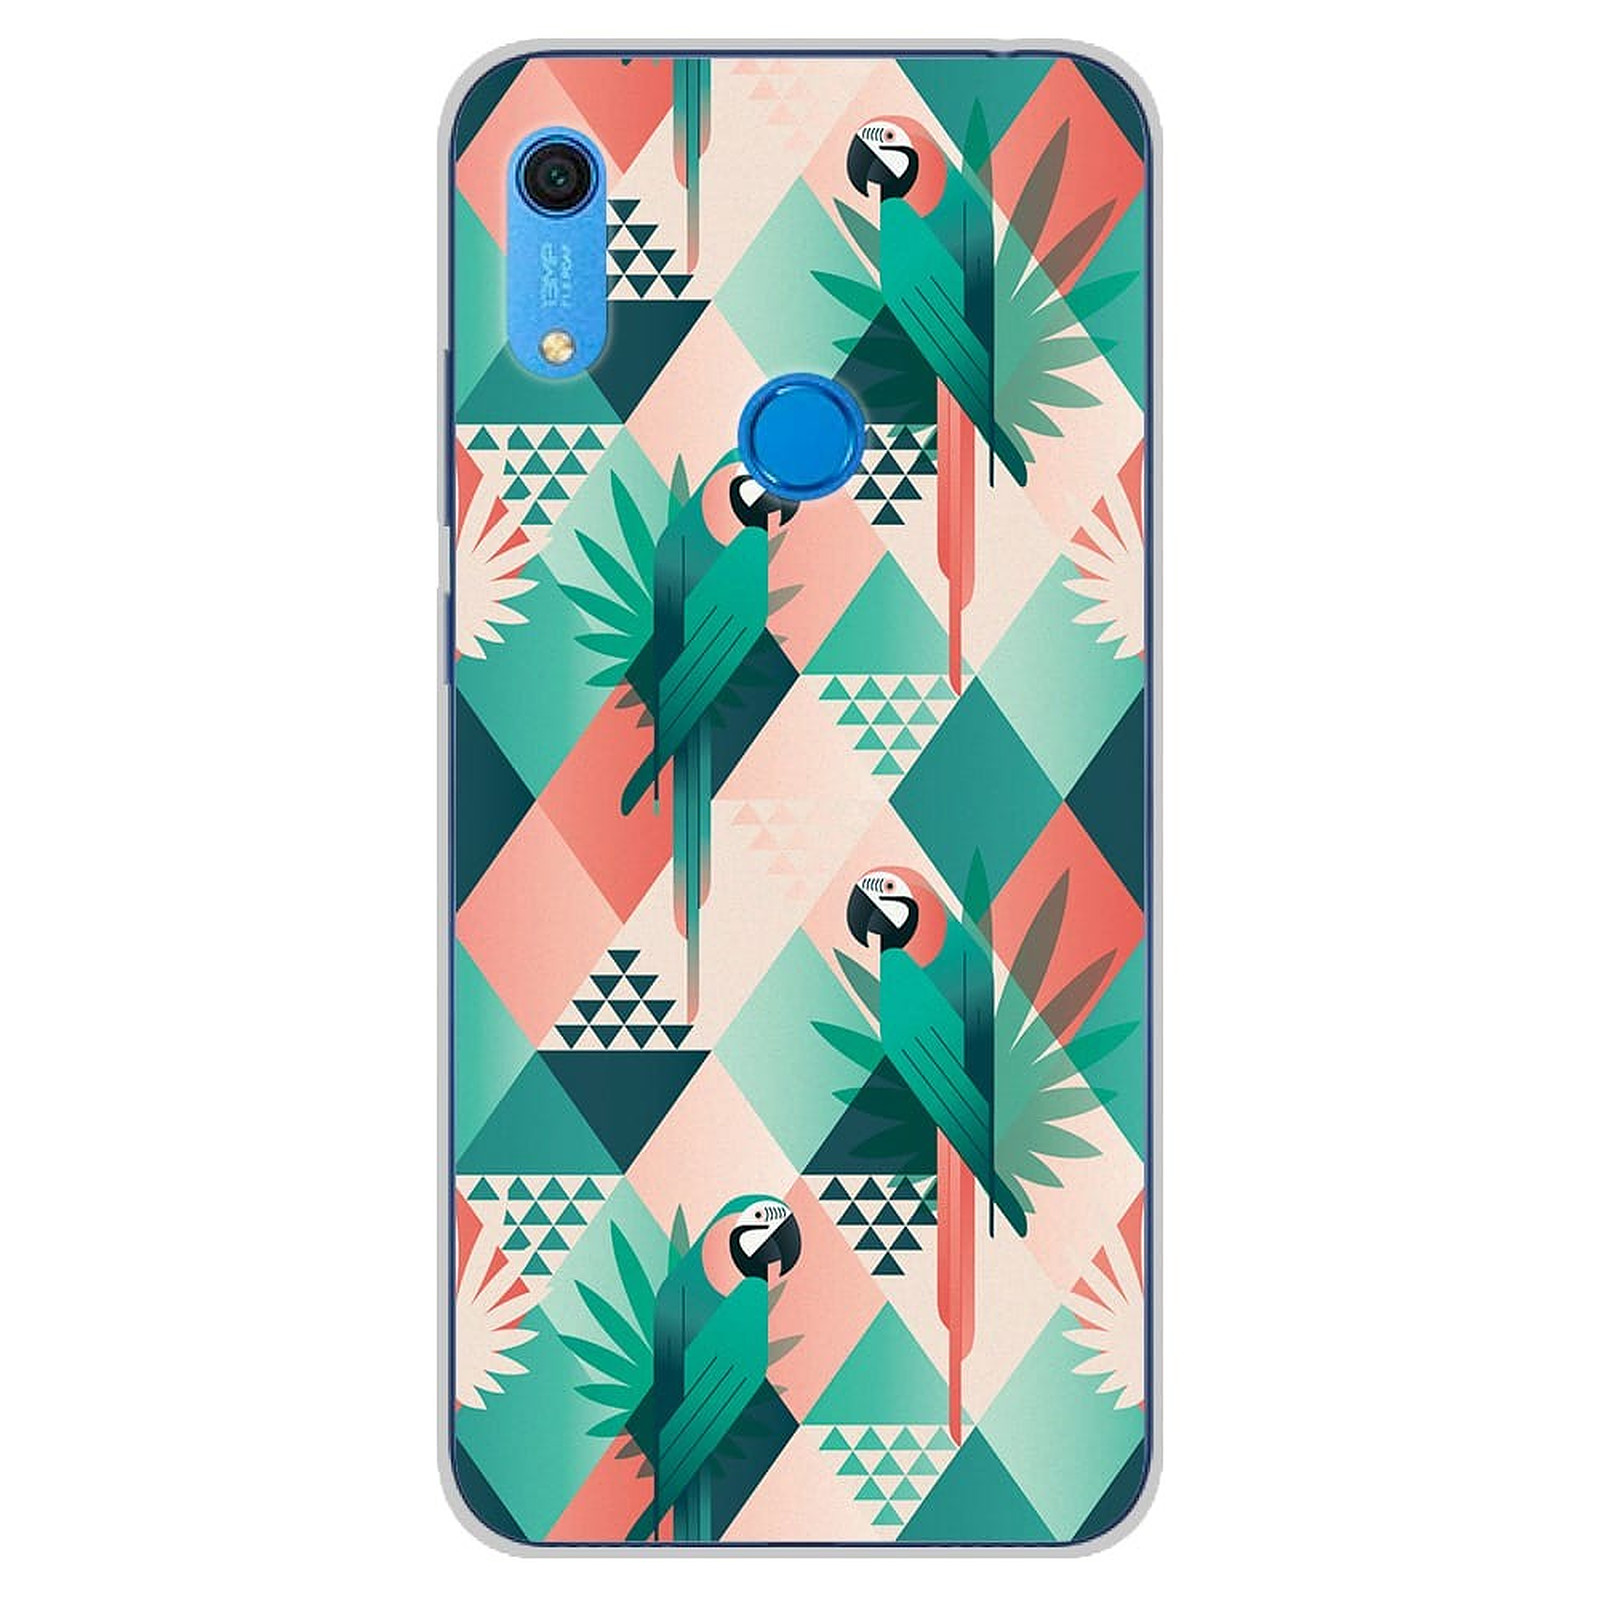 1001 Coques Coque silicone gel Huawei Y6S motif Perroquet ge´ome´trique - Coque telephone 1001Coques